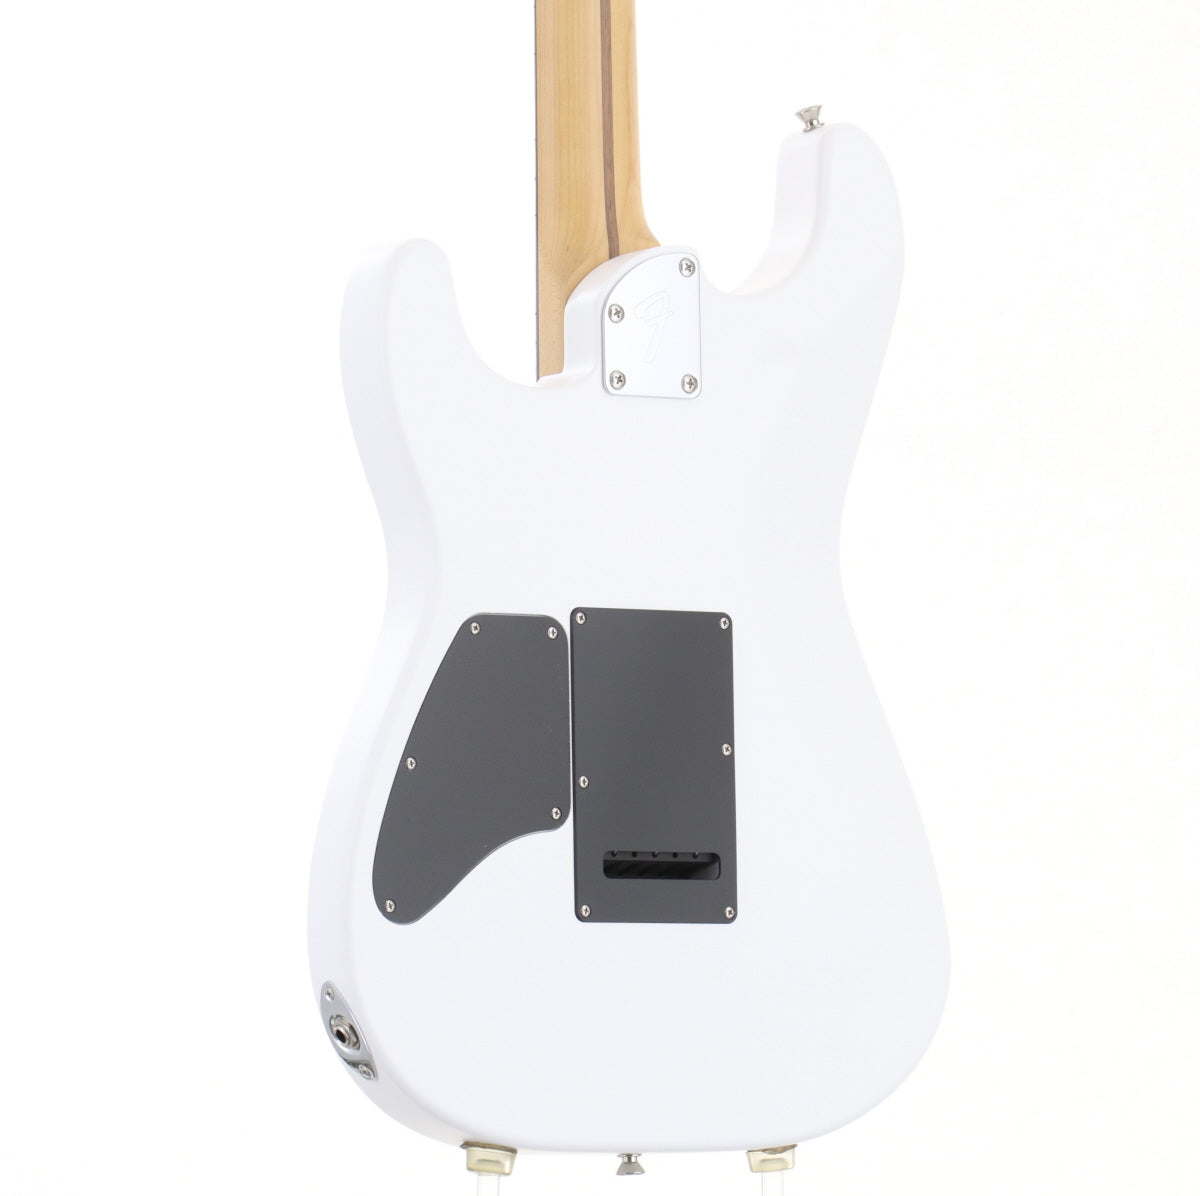 [SN JD22026636] USED Fender Made in Japan / Made in Japan Elemental Stratocaster Rosewood Fingerboard Nimbus White [10]